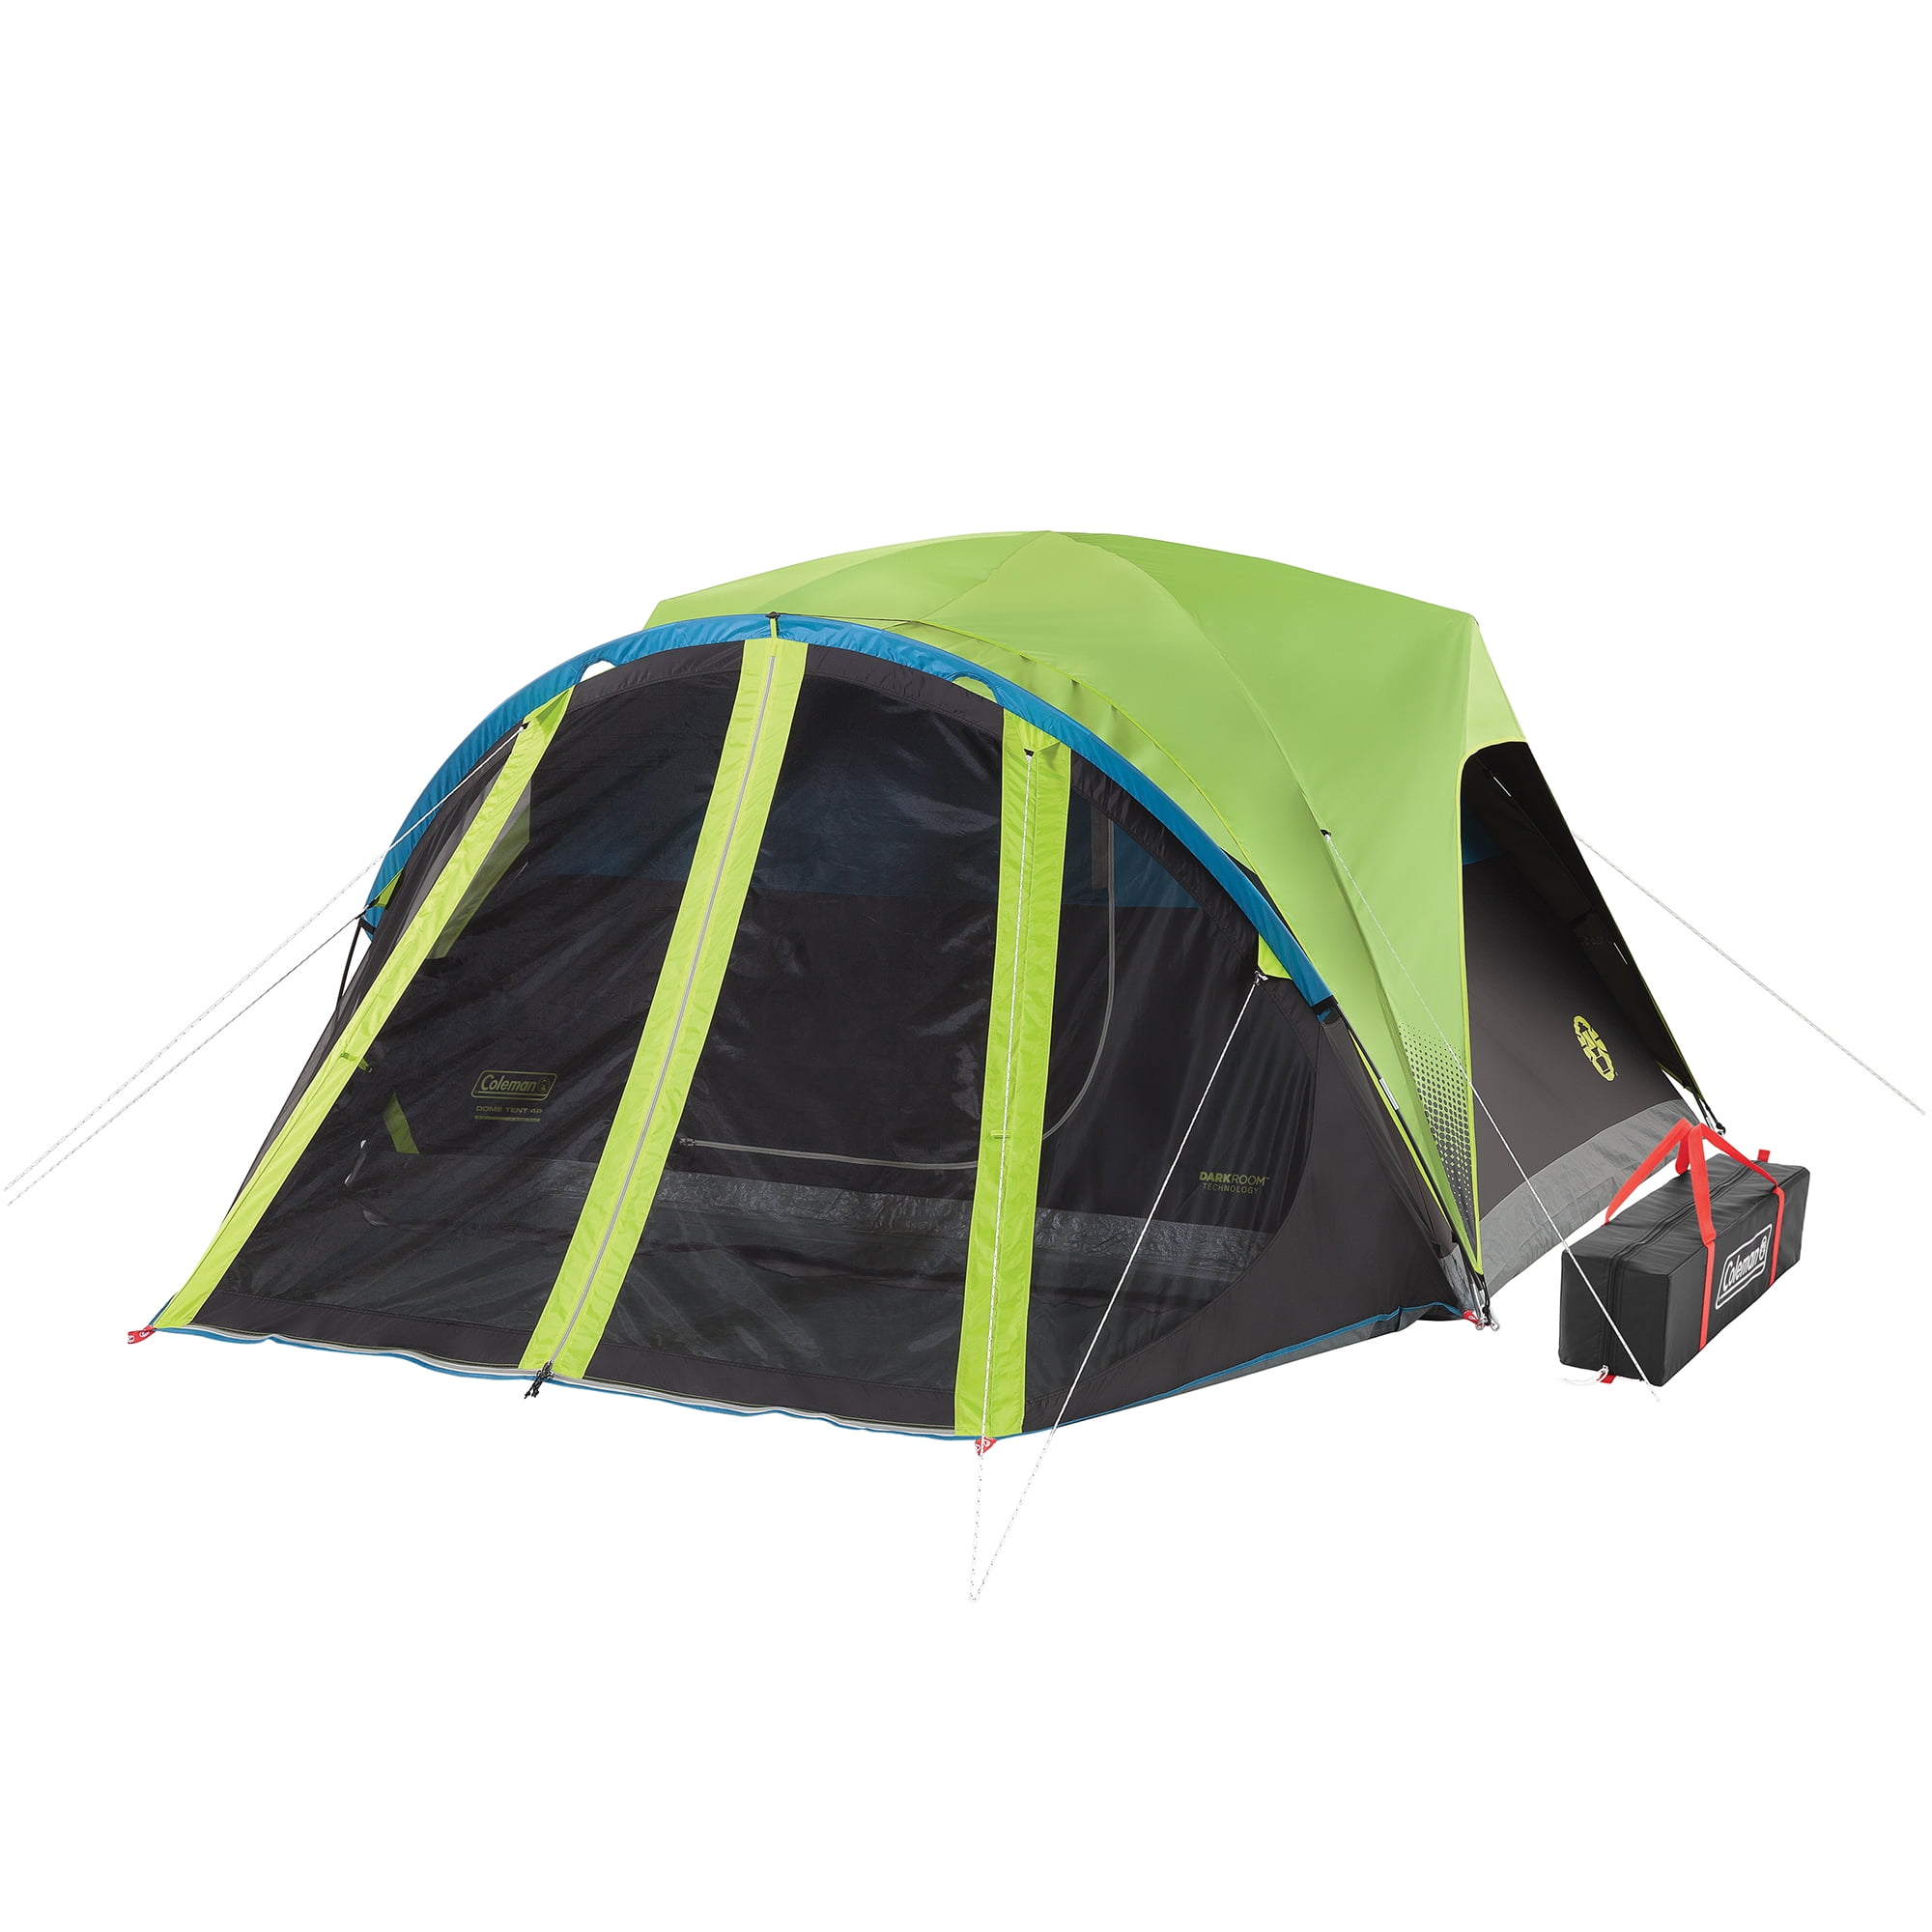 Coleman 2000033190 10 Foot x 9 Foot 6-Person Dark Room Fast Pitch Dome Tent 